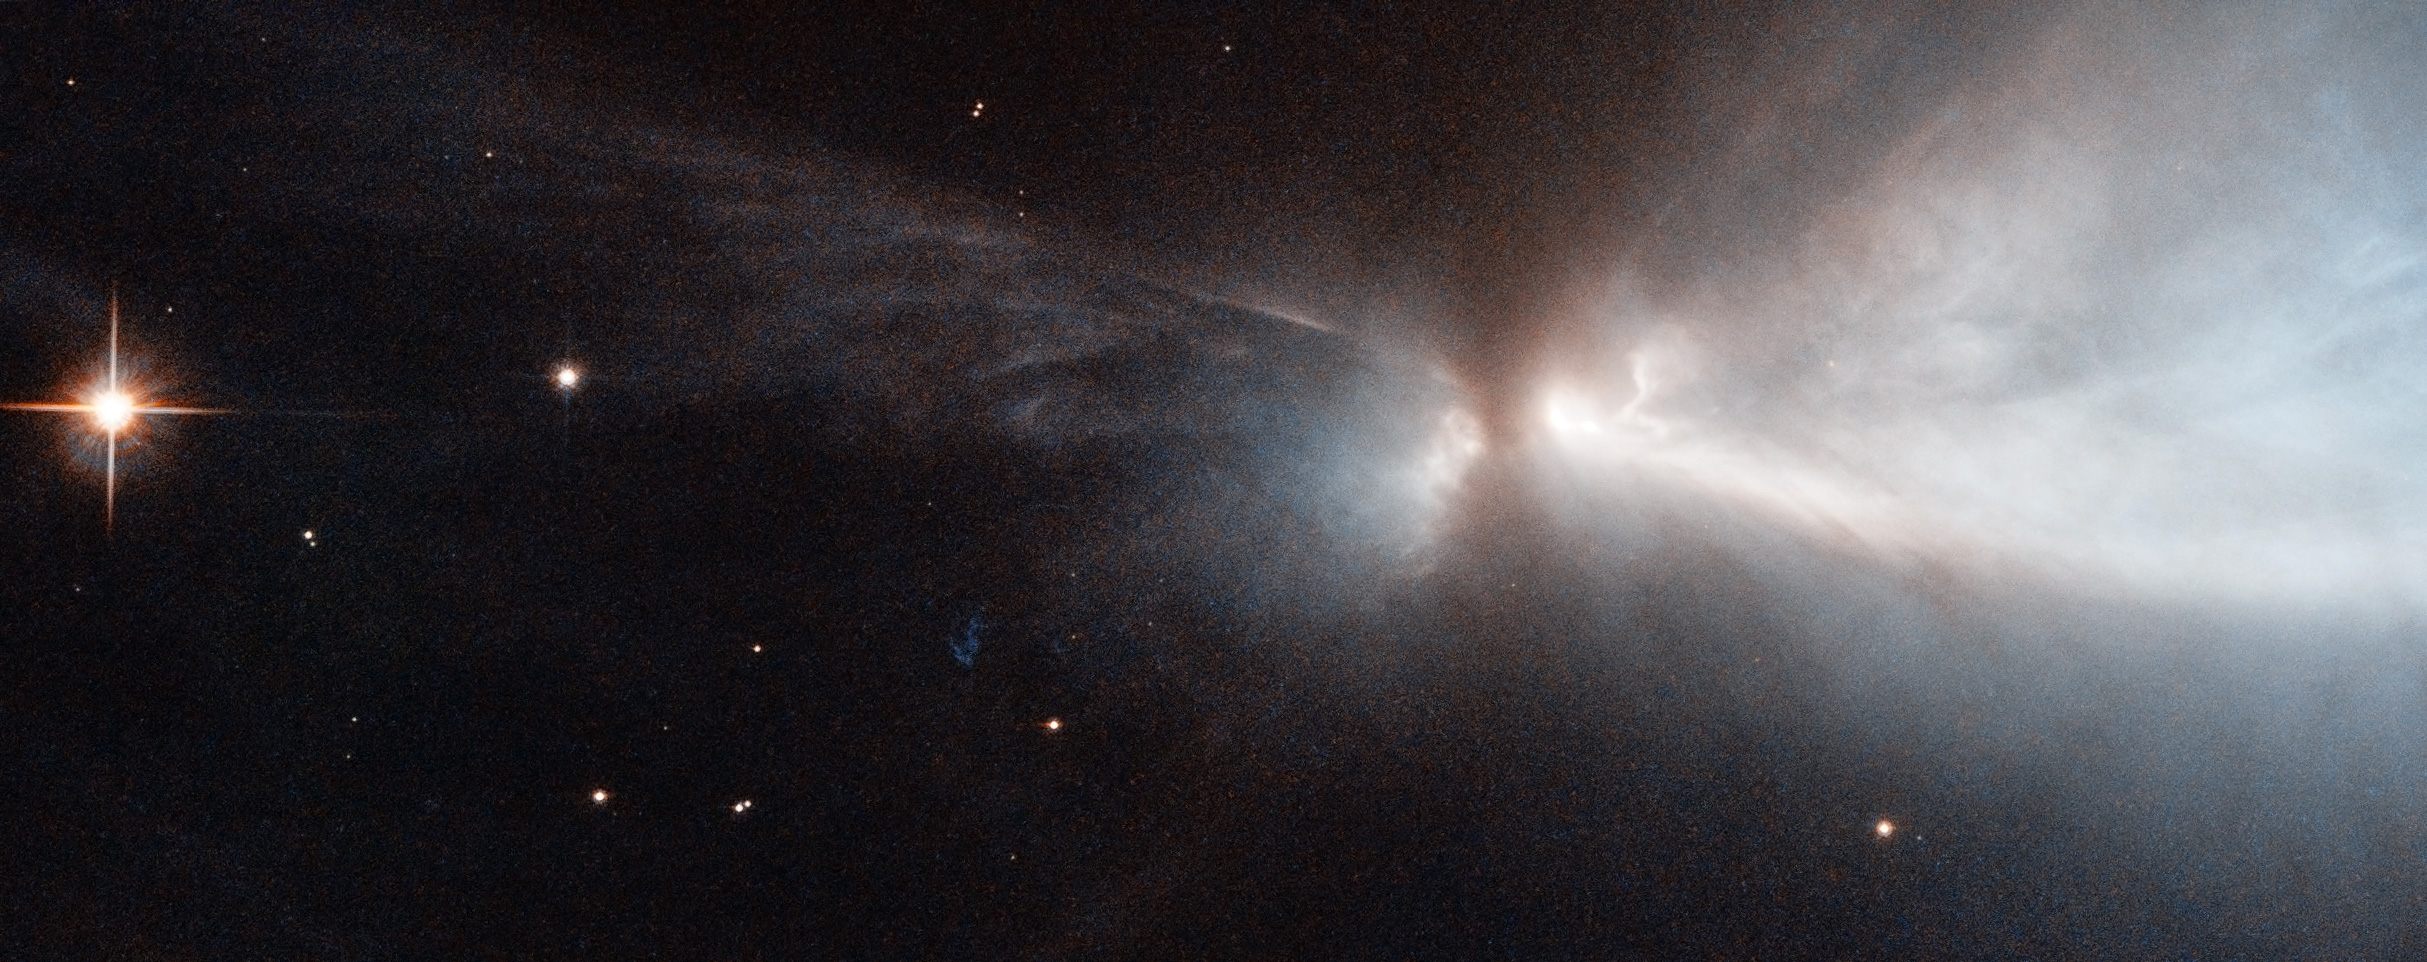 Image credit: NASA and ESA Hubble Space Telescope. Acknowledgements: Kevin Luhman (Pennsylvania State University), and Judy Schmidt, of the Chamaeleon cloud and a newly-forming star within it--HH 909A--emitting narrow streams of gas from its poles.